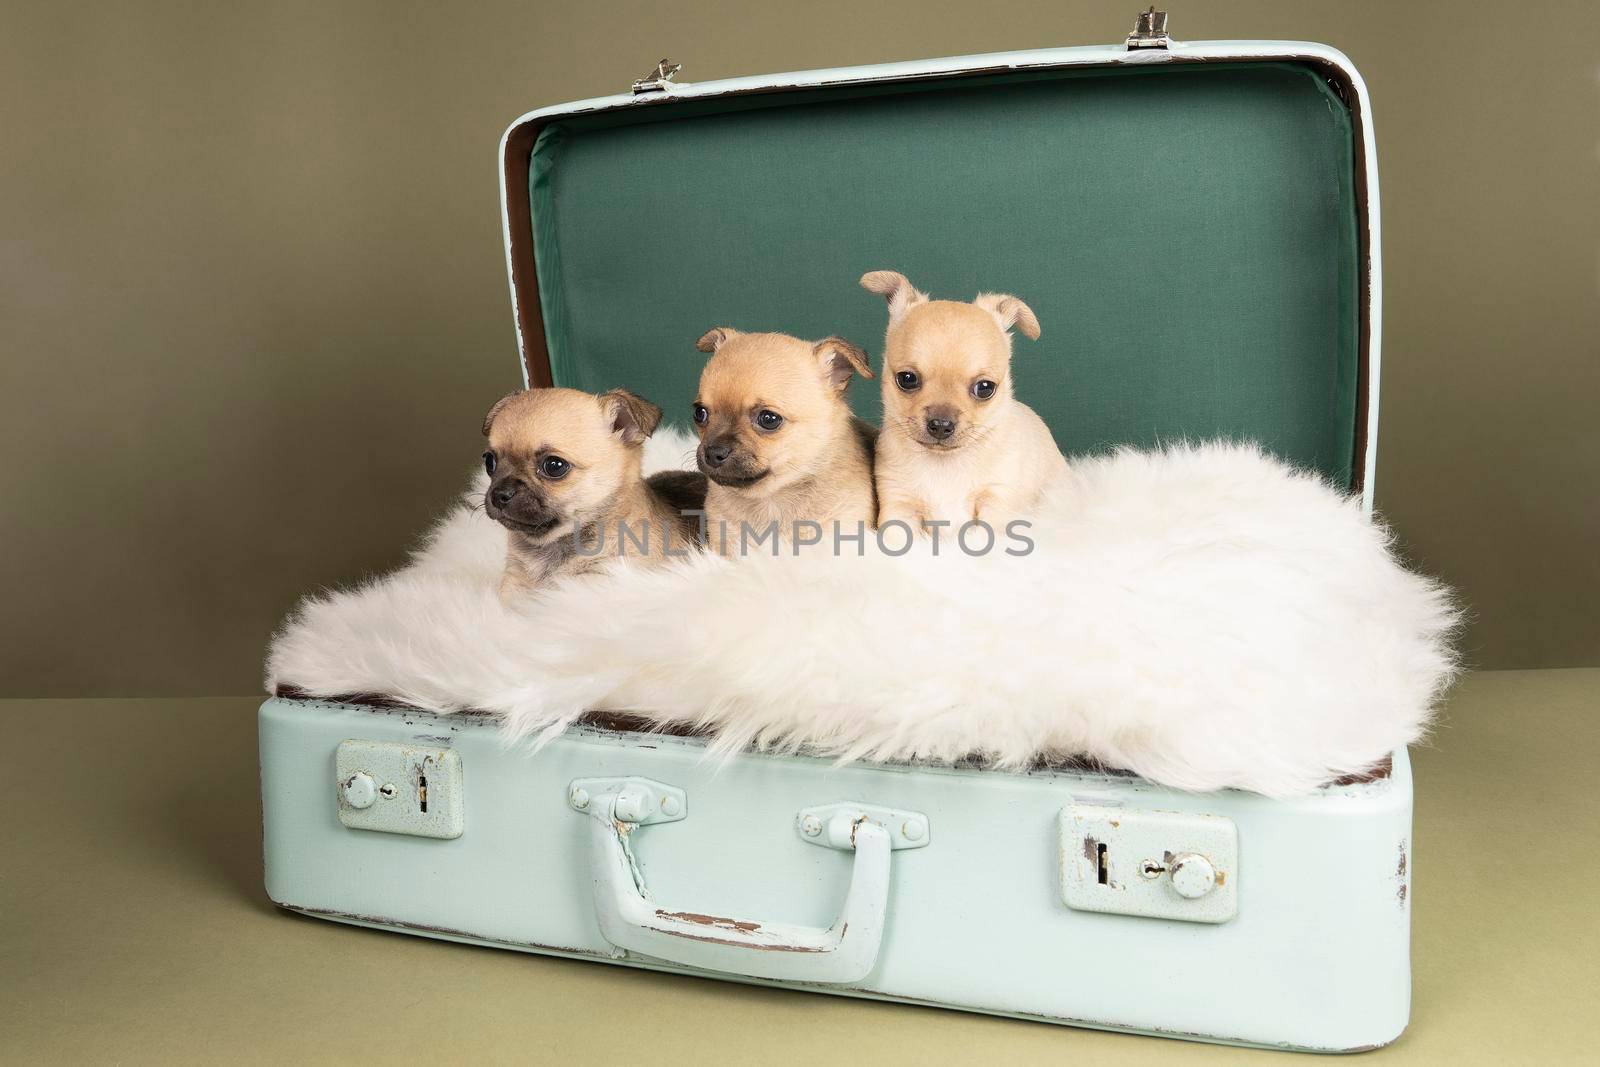 Three cute little Chihuahua puppies side to side on a white fur in a green suitcase with a green background